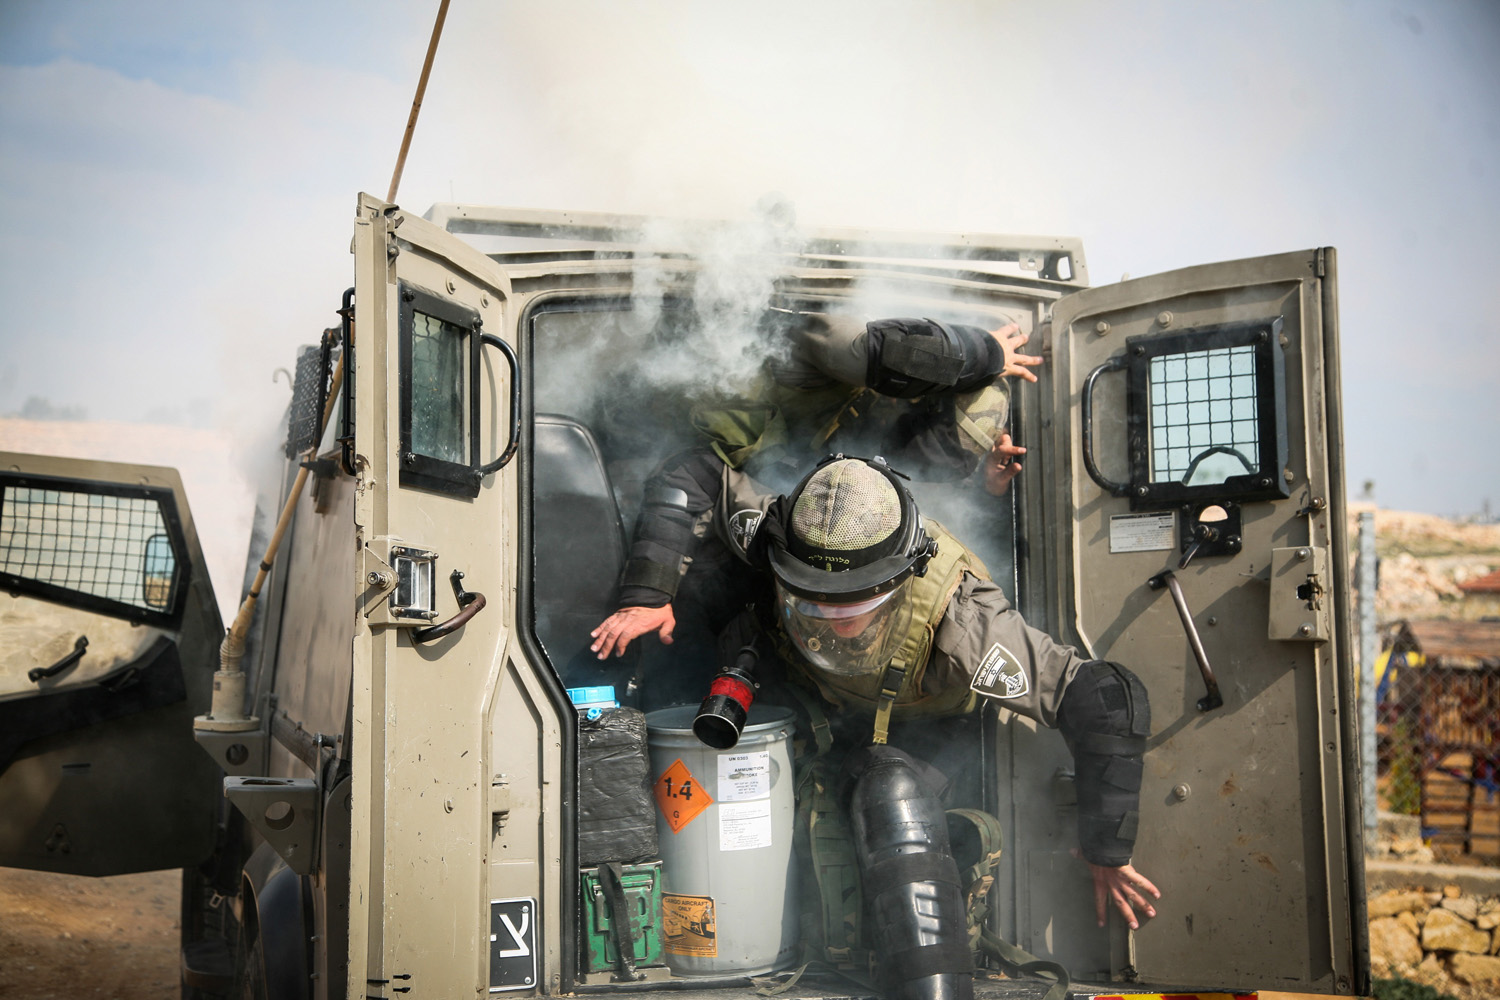 Feb. 7, 2014. Four Israeli soldiers suffered from excessive tear gas inhalation after an accident in which tear gas canisters exploded inside a military vehicle near the central West Bank village of Bilin.